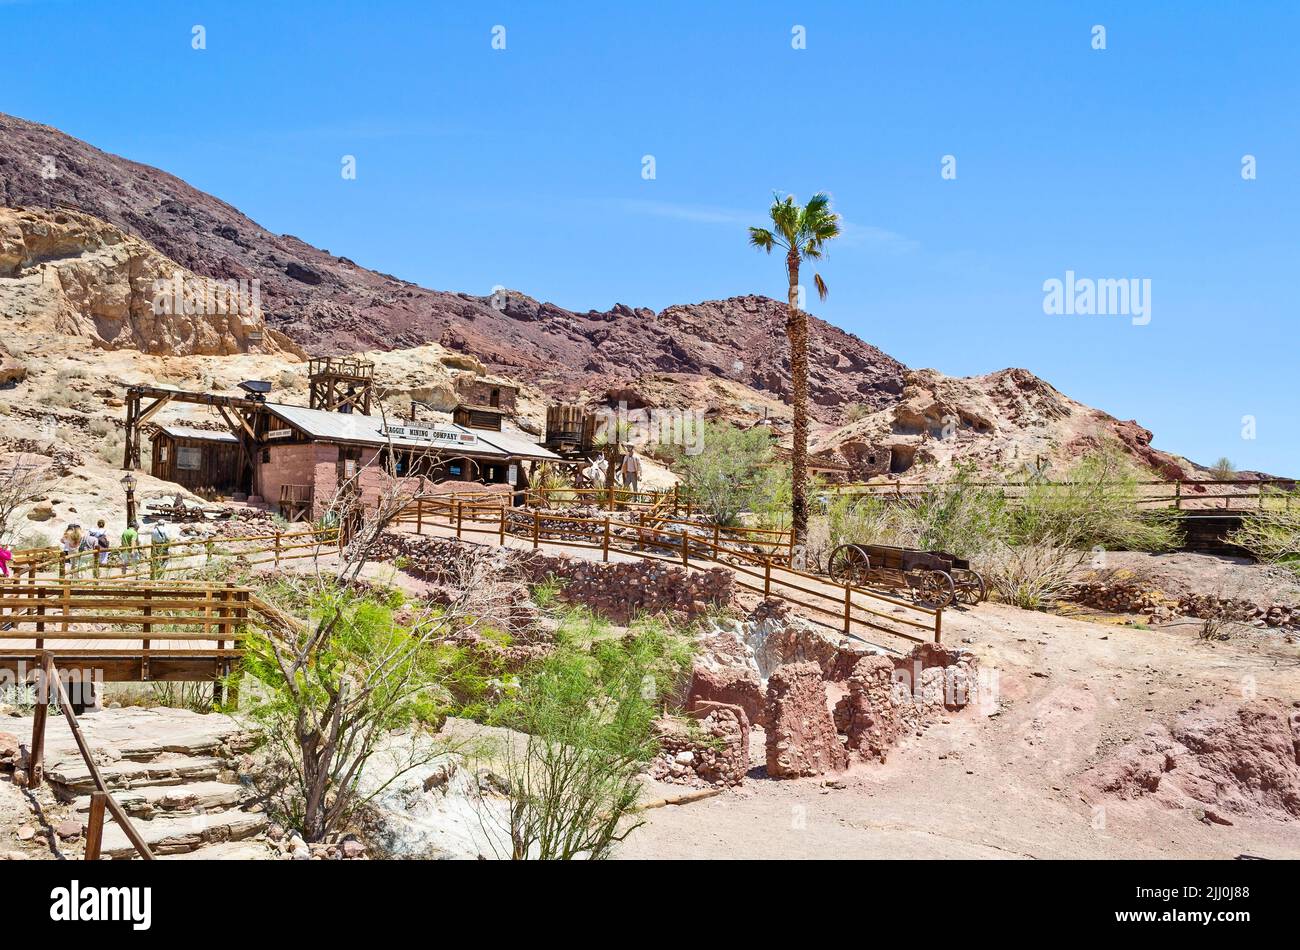 Calico is a ghost town and former mining town in San Bernardino County, California, United States. Calico received California Historical Landmark Stock Photo